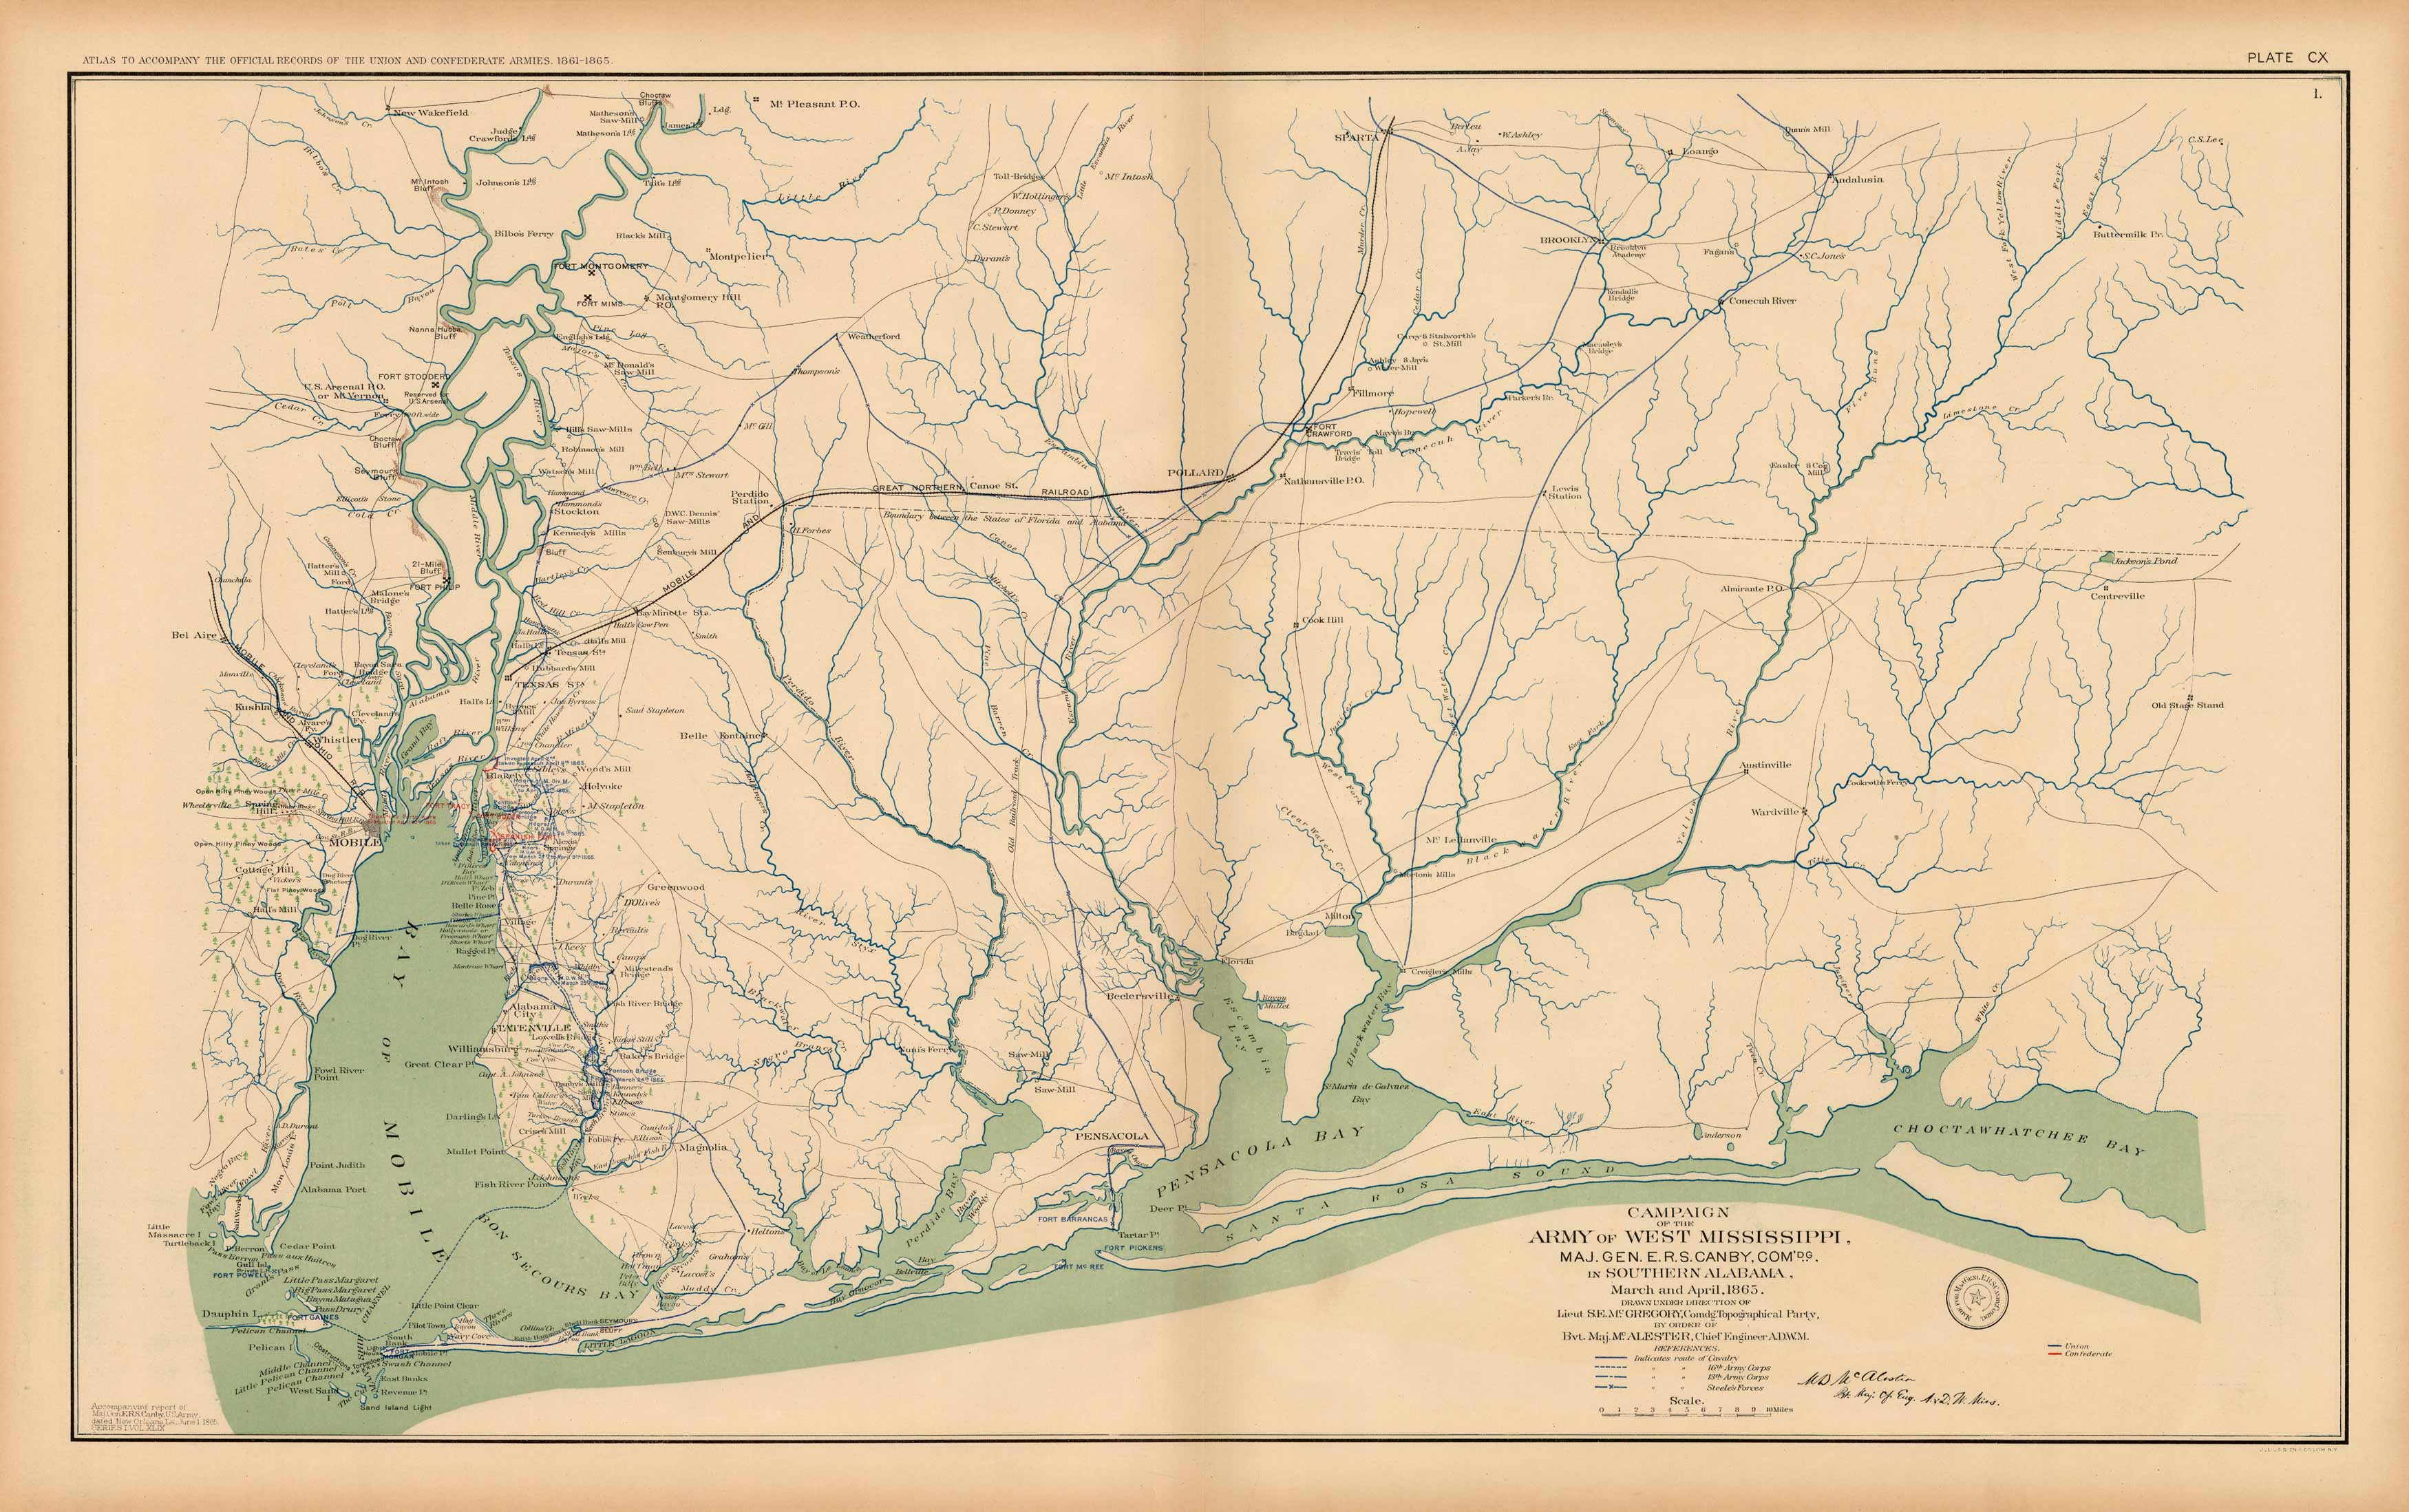 Civil War Atlas: Plate 110; Campaign of The Army of West Mississippi